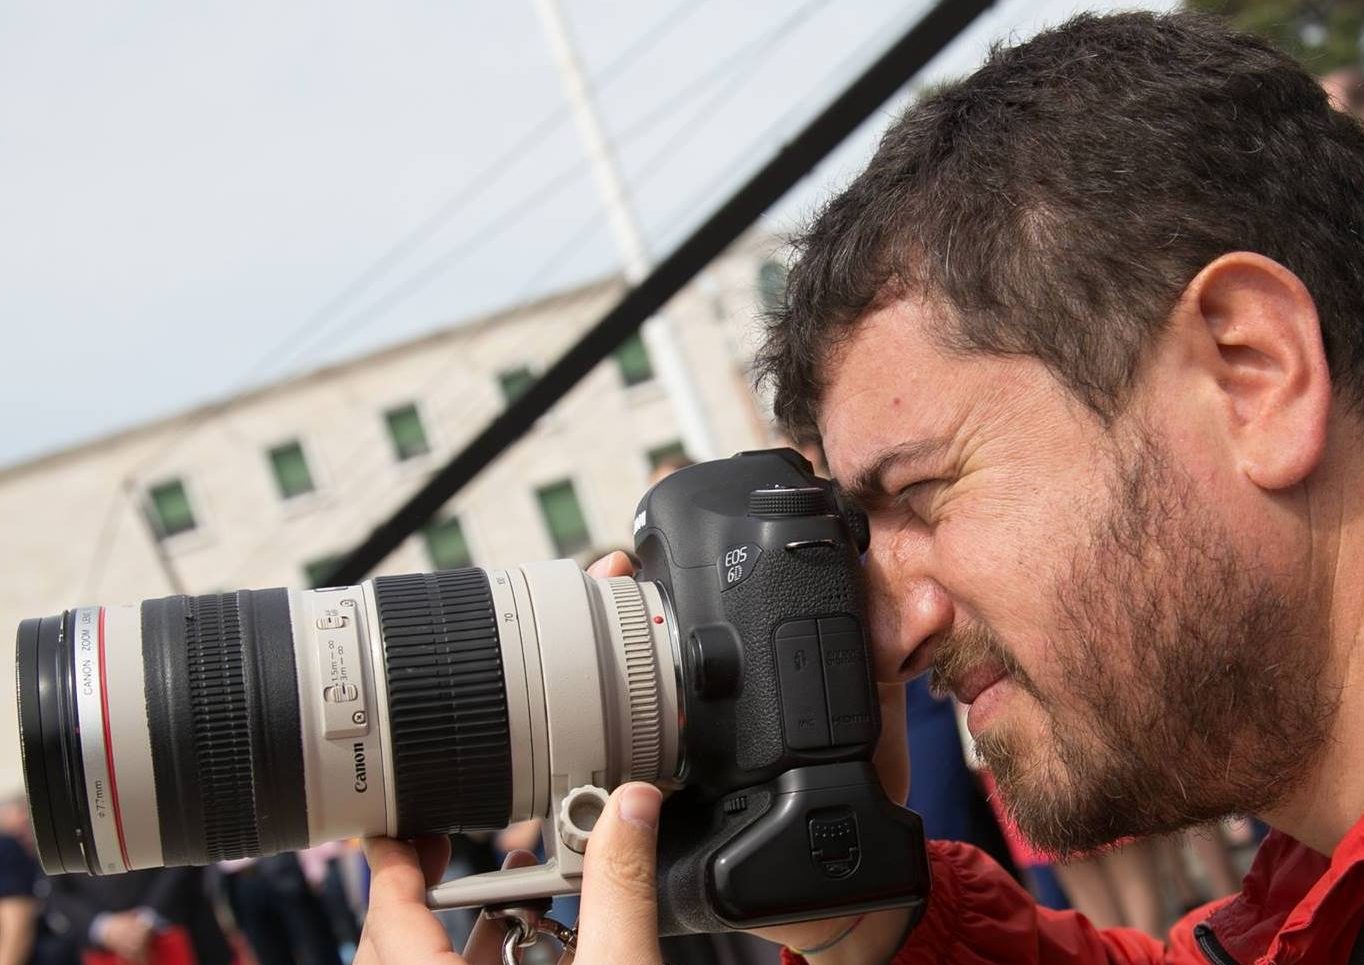 Albanian Police Stop Photographer Filming Riots for ‘Damaging Country’s Image’